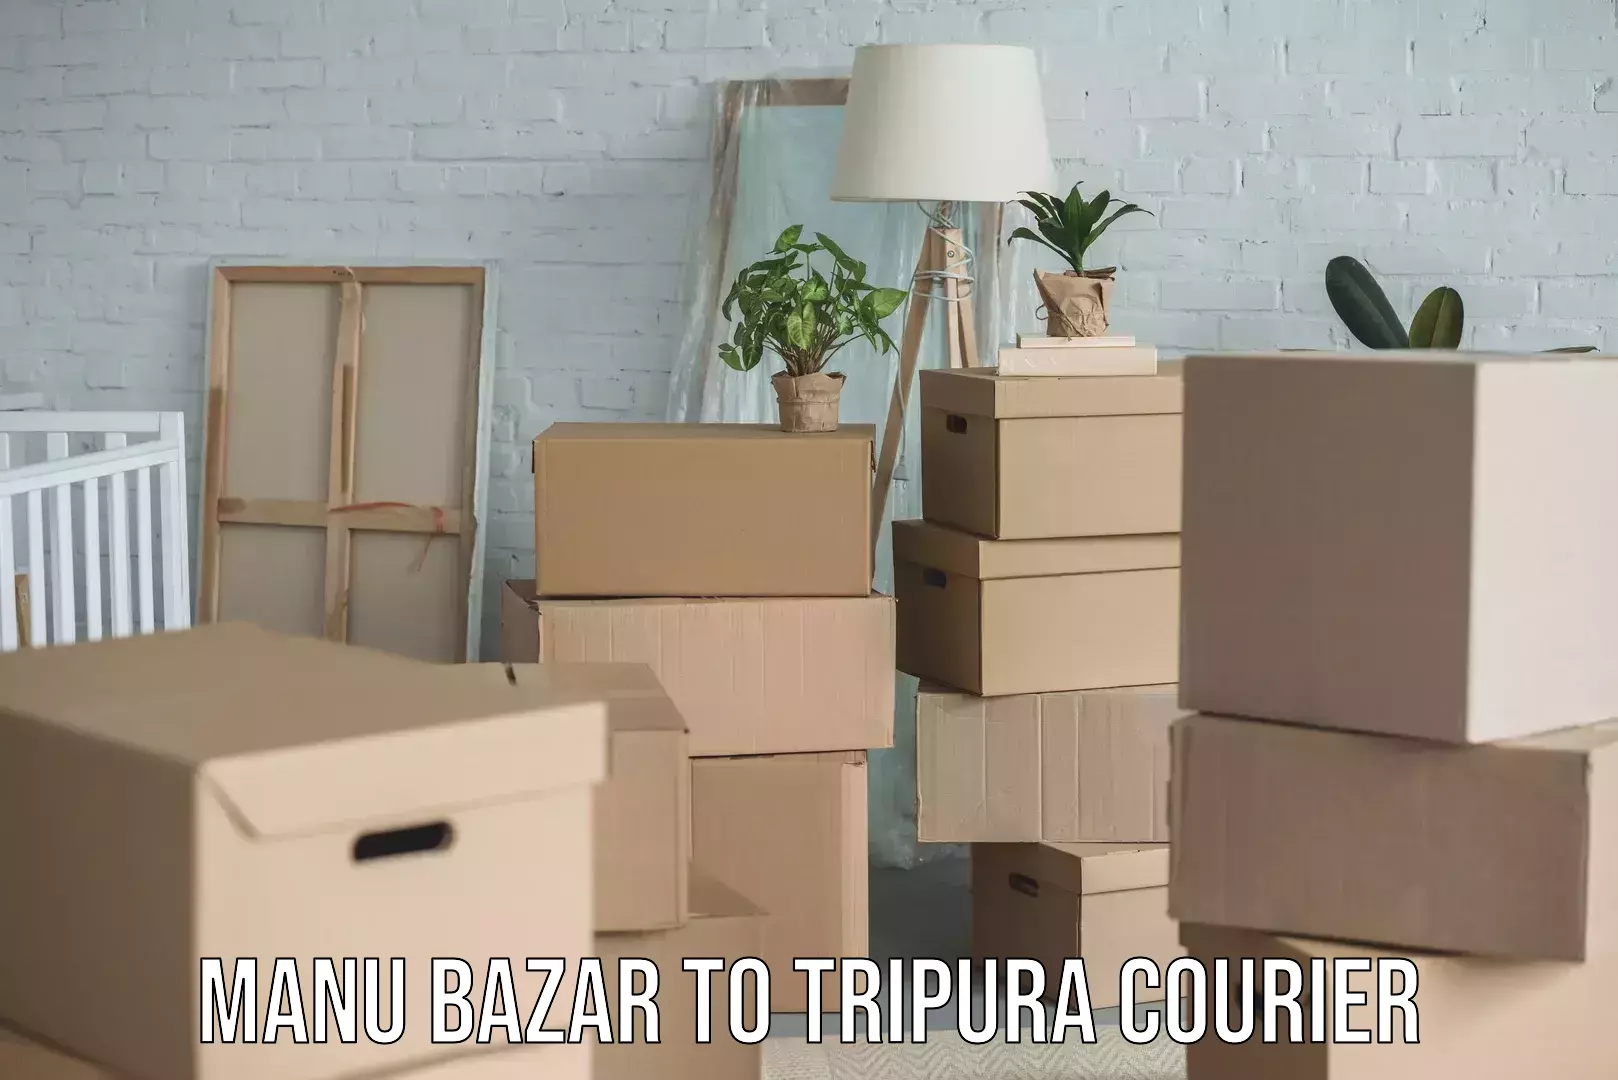 Next-day delivery options Manu Bazar to Tripura